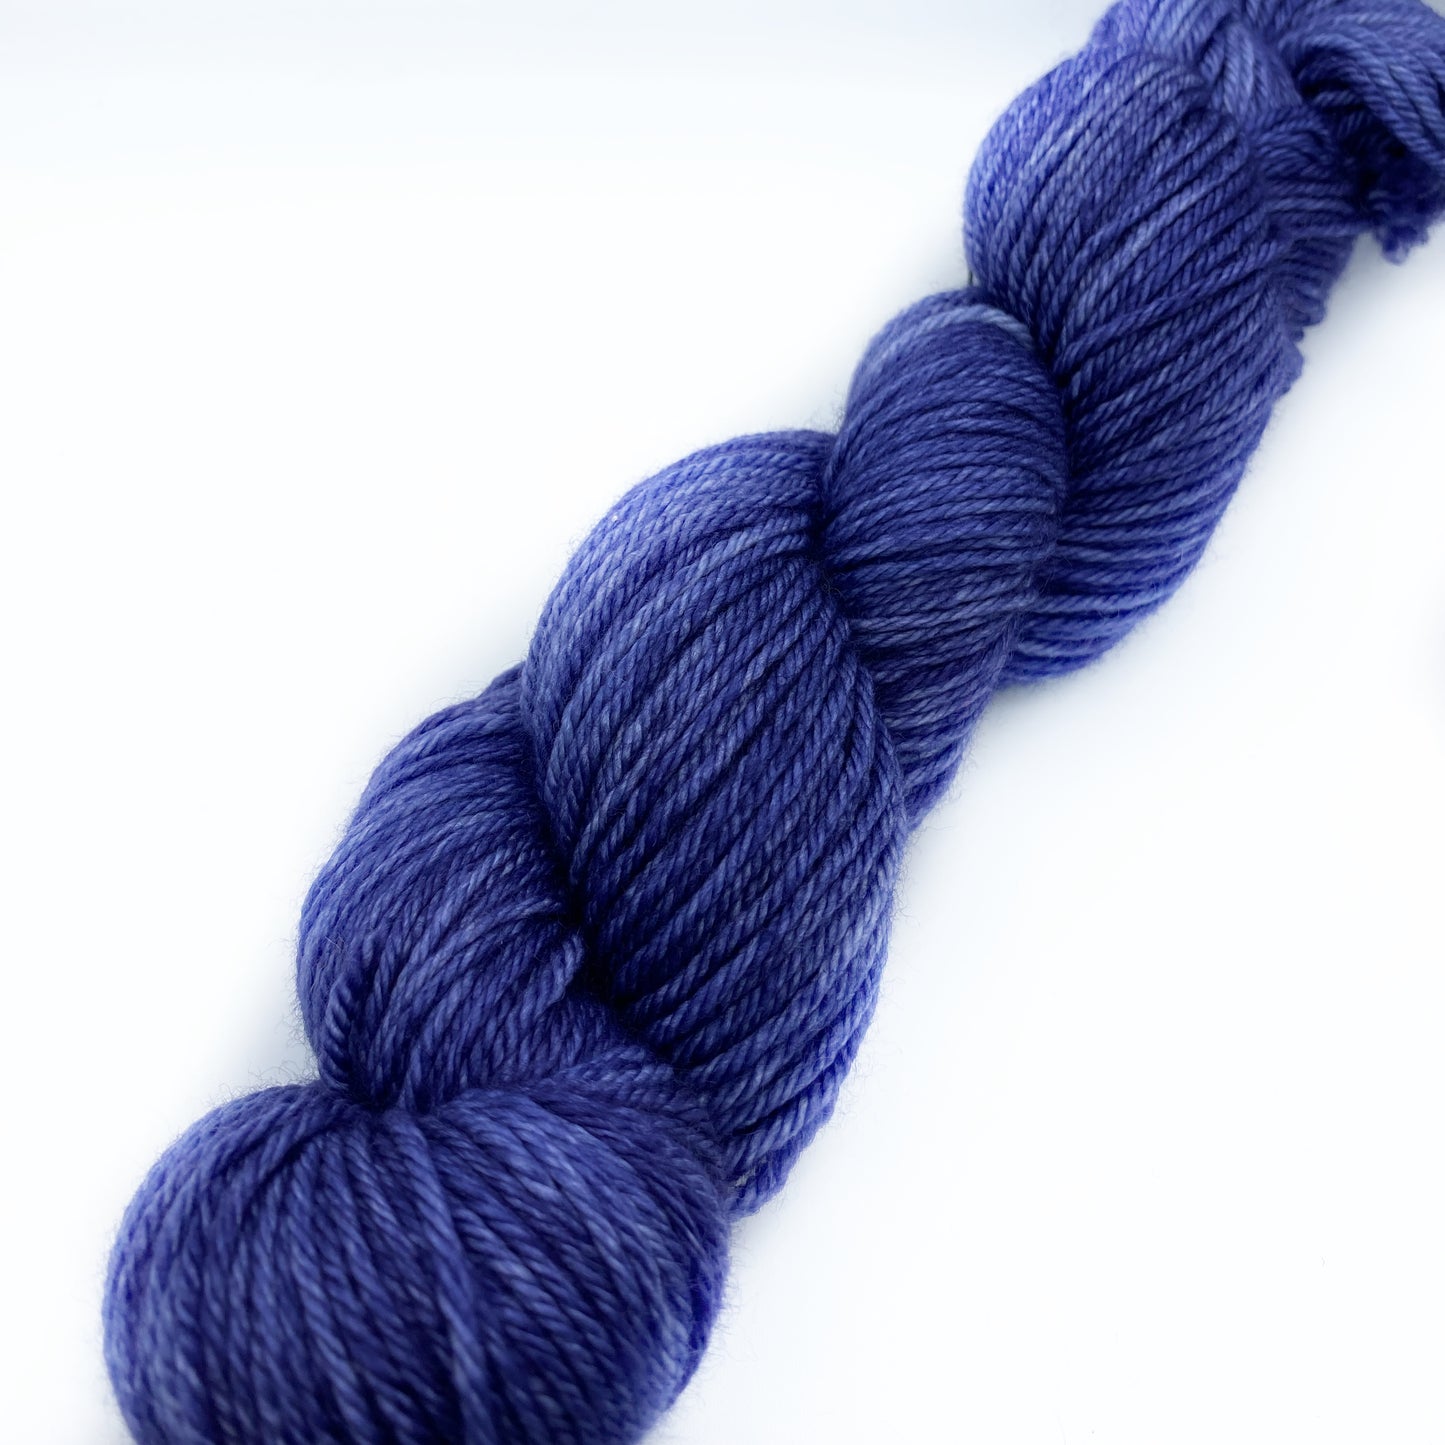 Middle of the Road—Worsted Weight